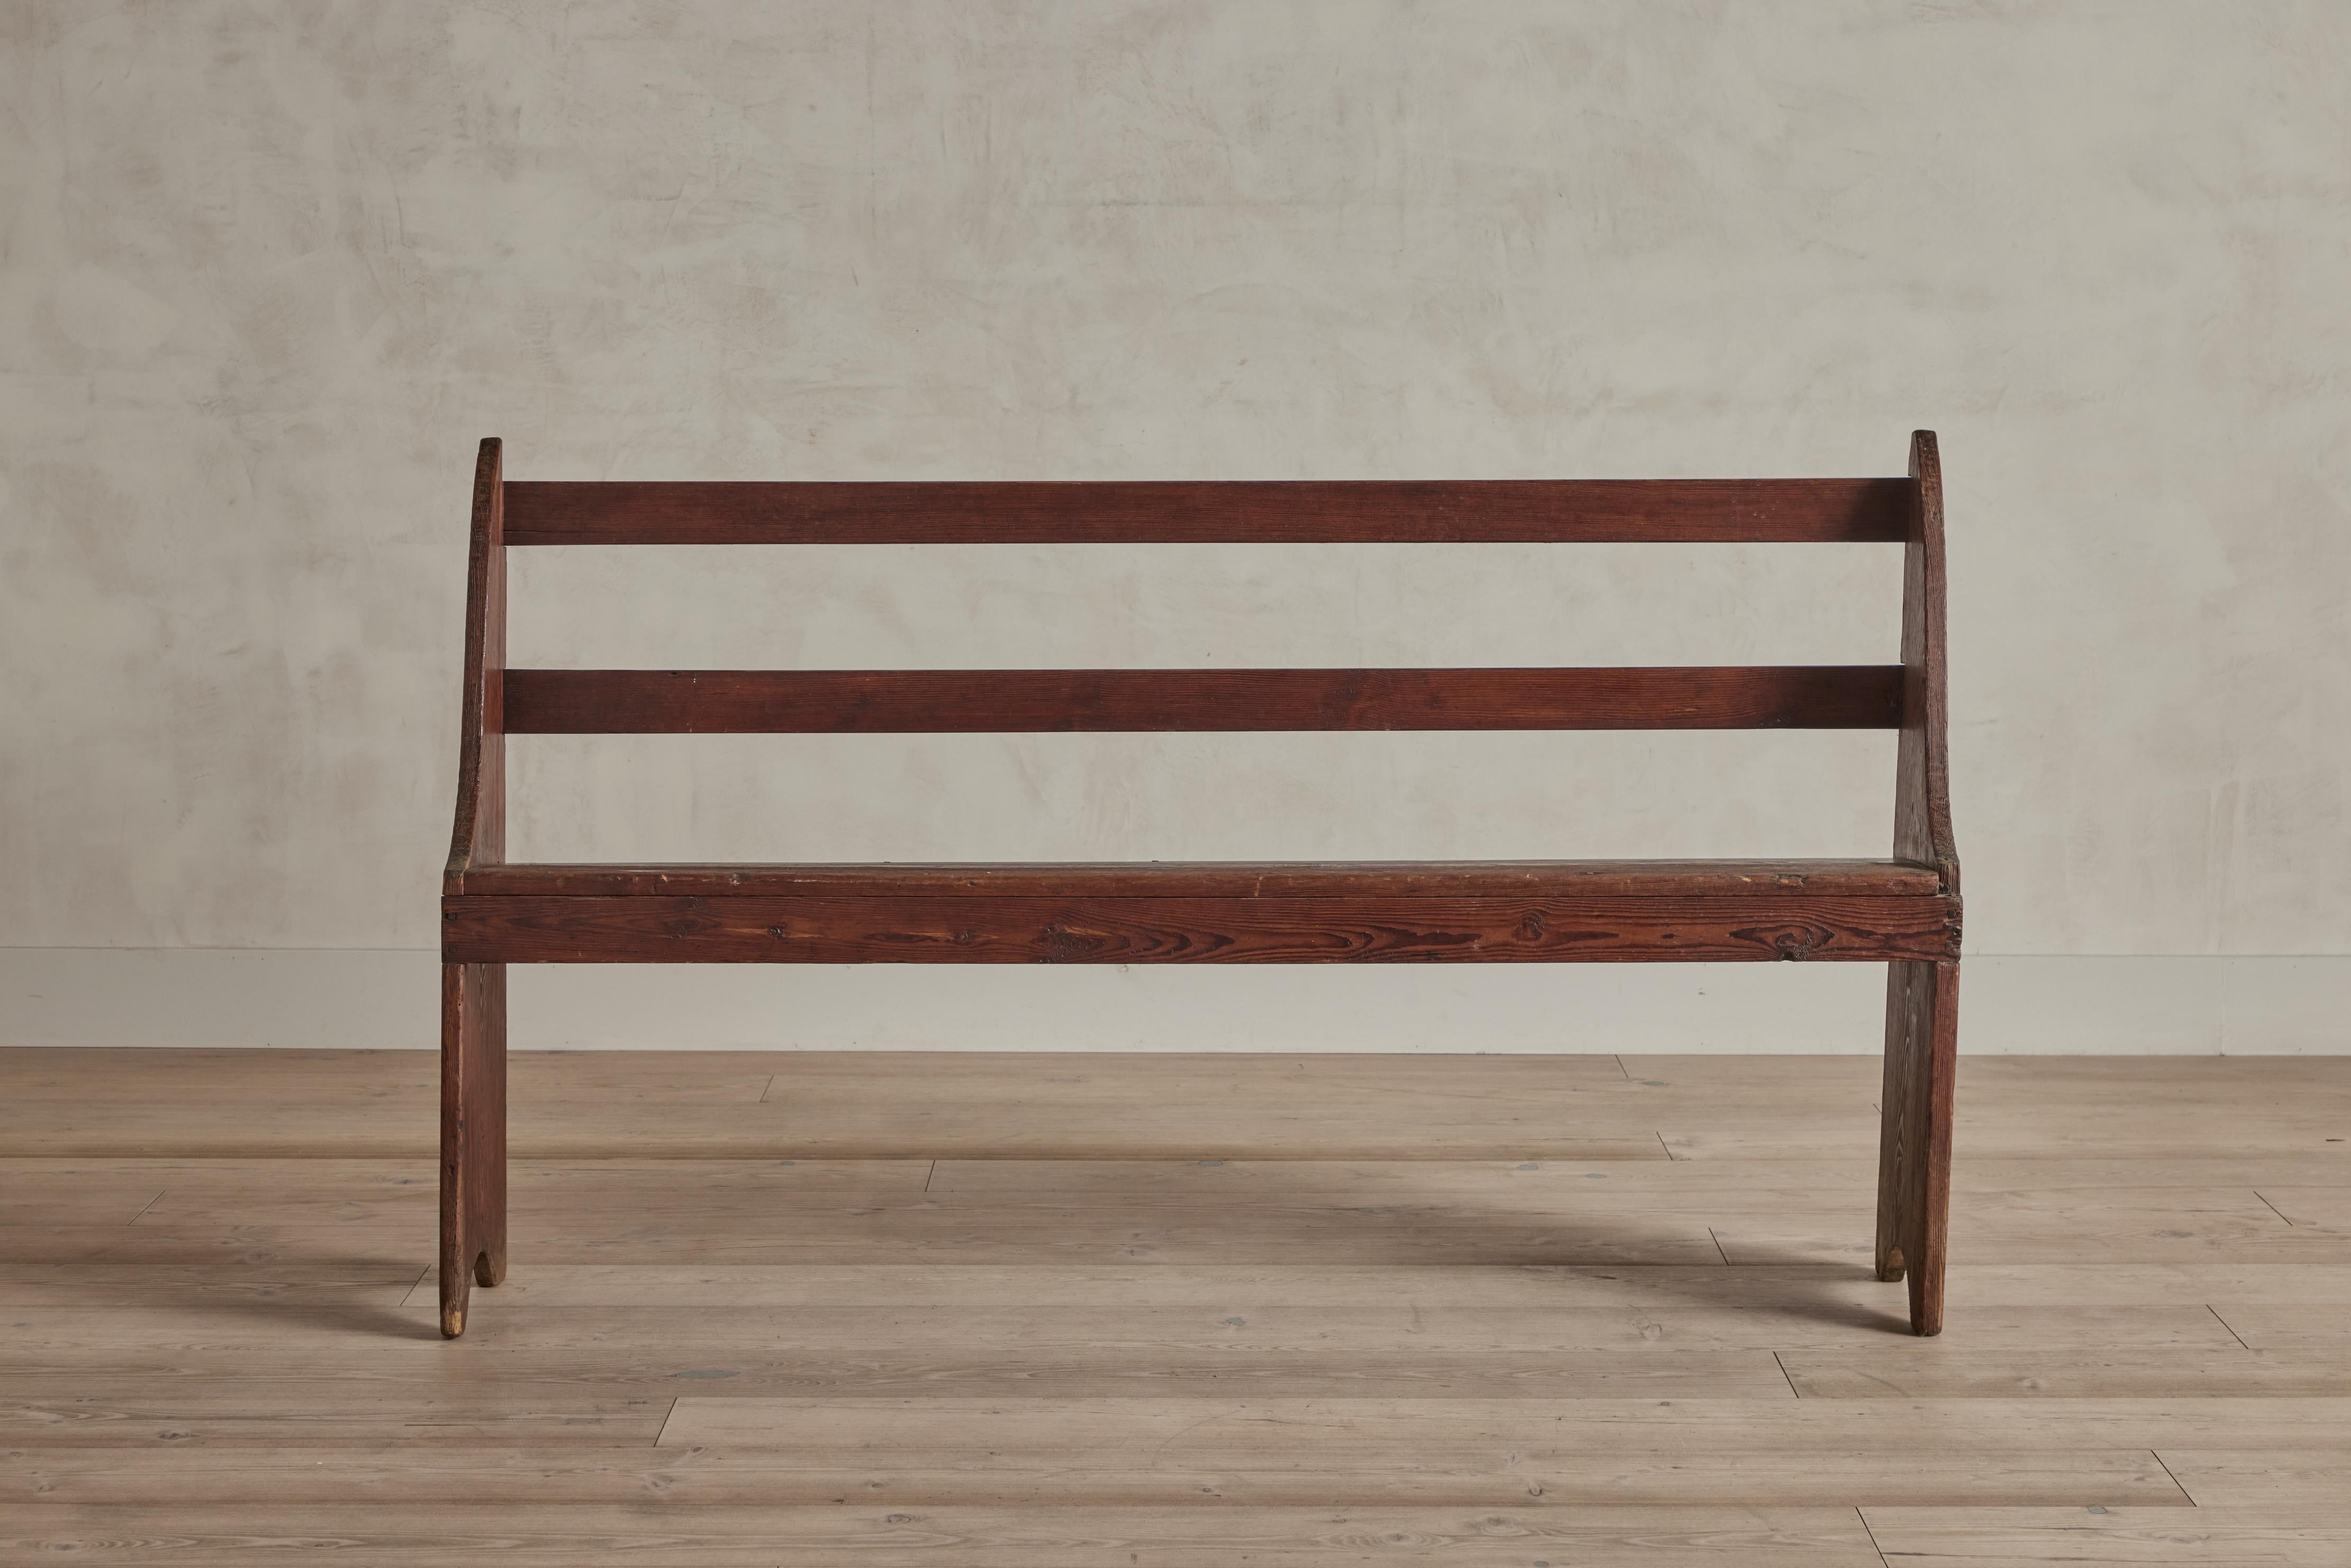 Narrow rustic wood church bench from Virginia circa 1880. Wear throughout wood is consistent with age and use.